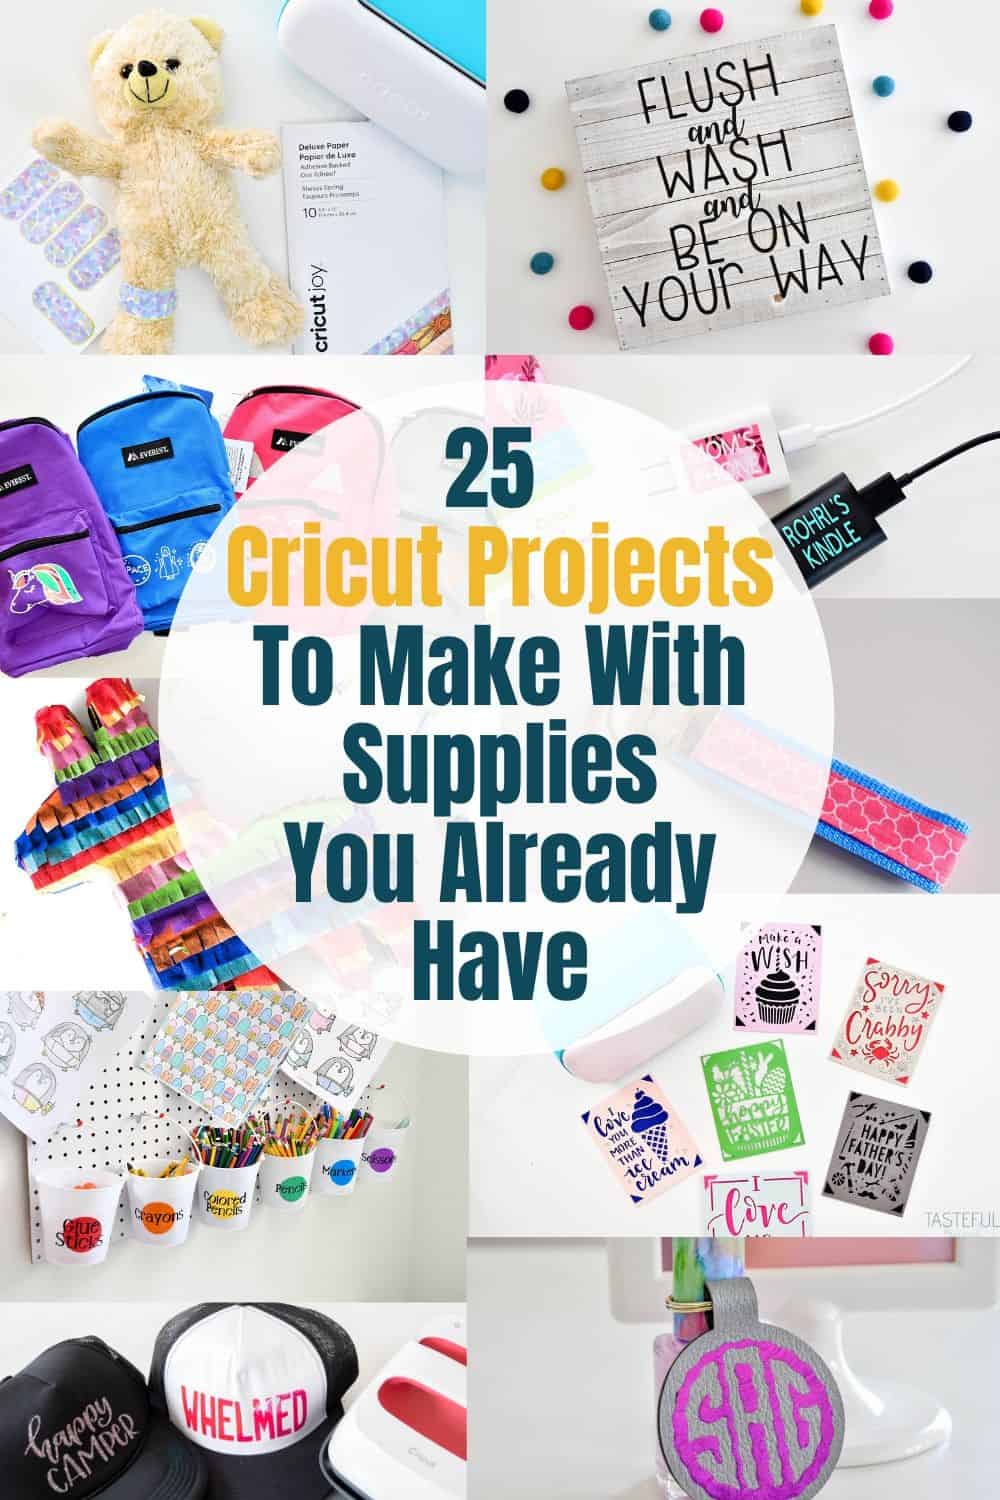 Keep busy while you're at home with lots of Cricut Craft Project Ideas!